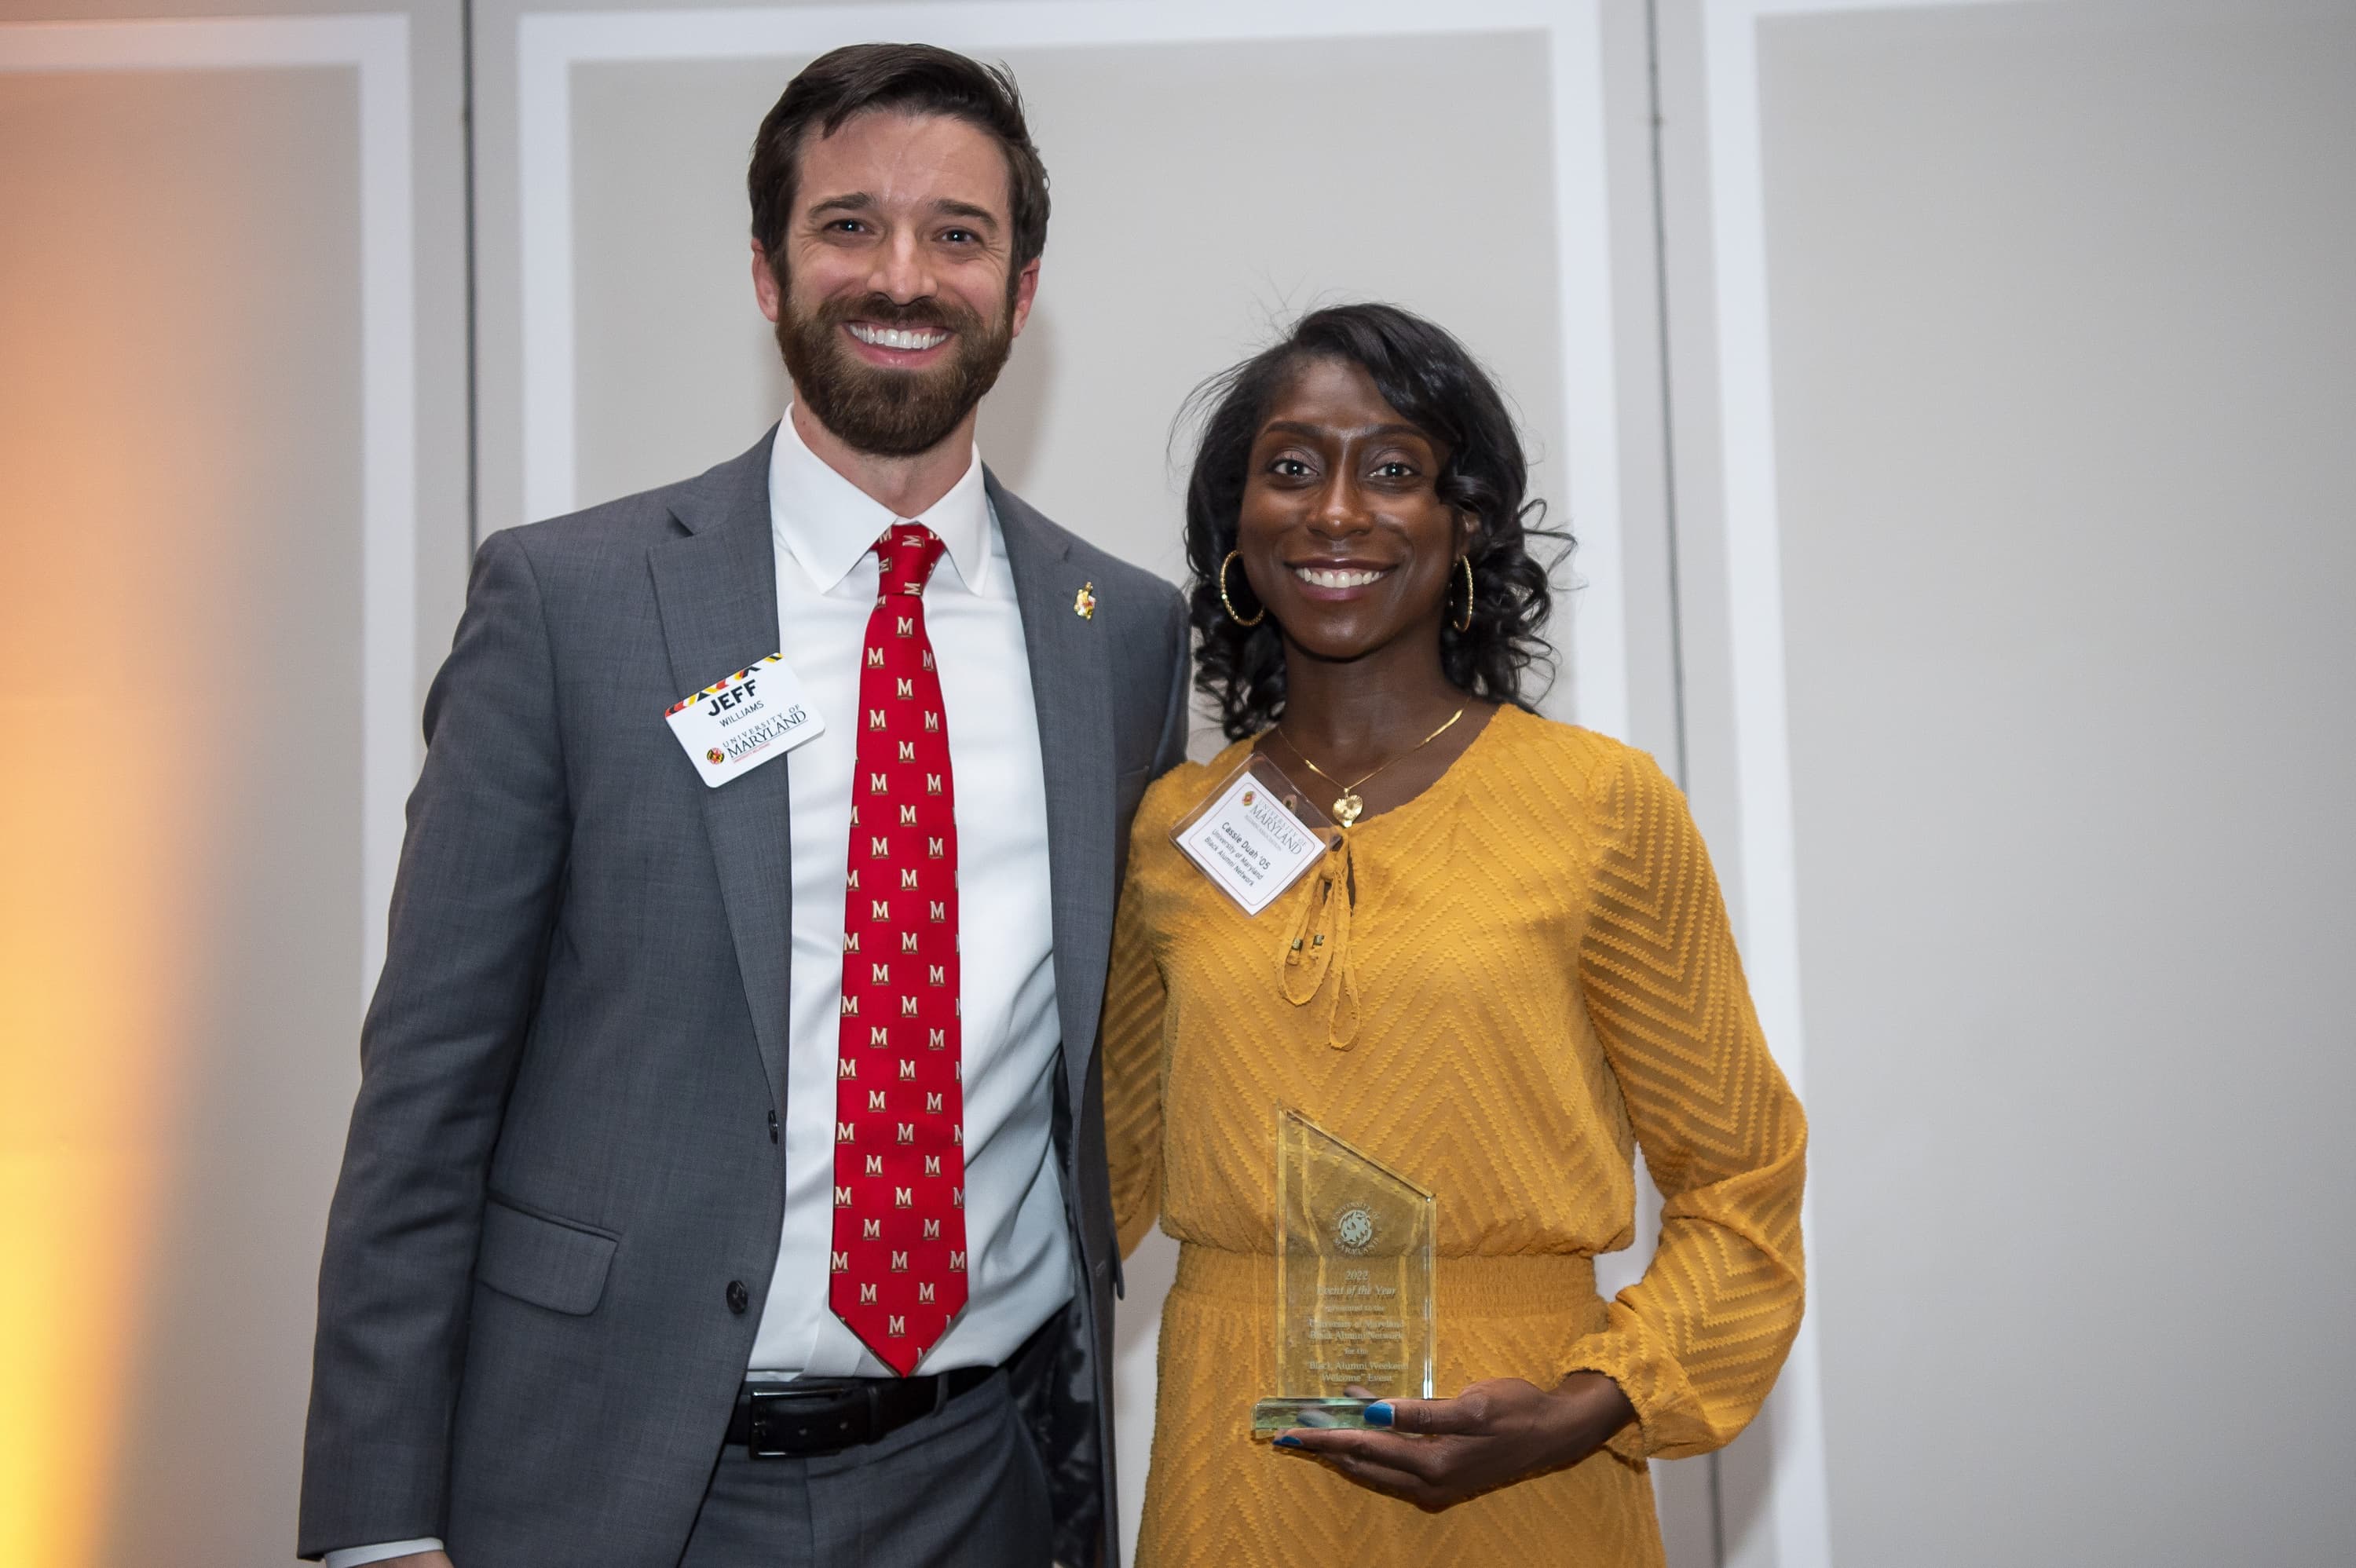 The Alumni Association's Jeff Williams stands along with UMBA's Cassie Duah at the Volunteer Leadership Awards